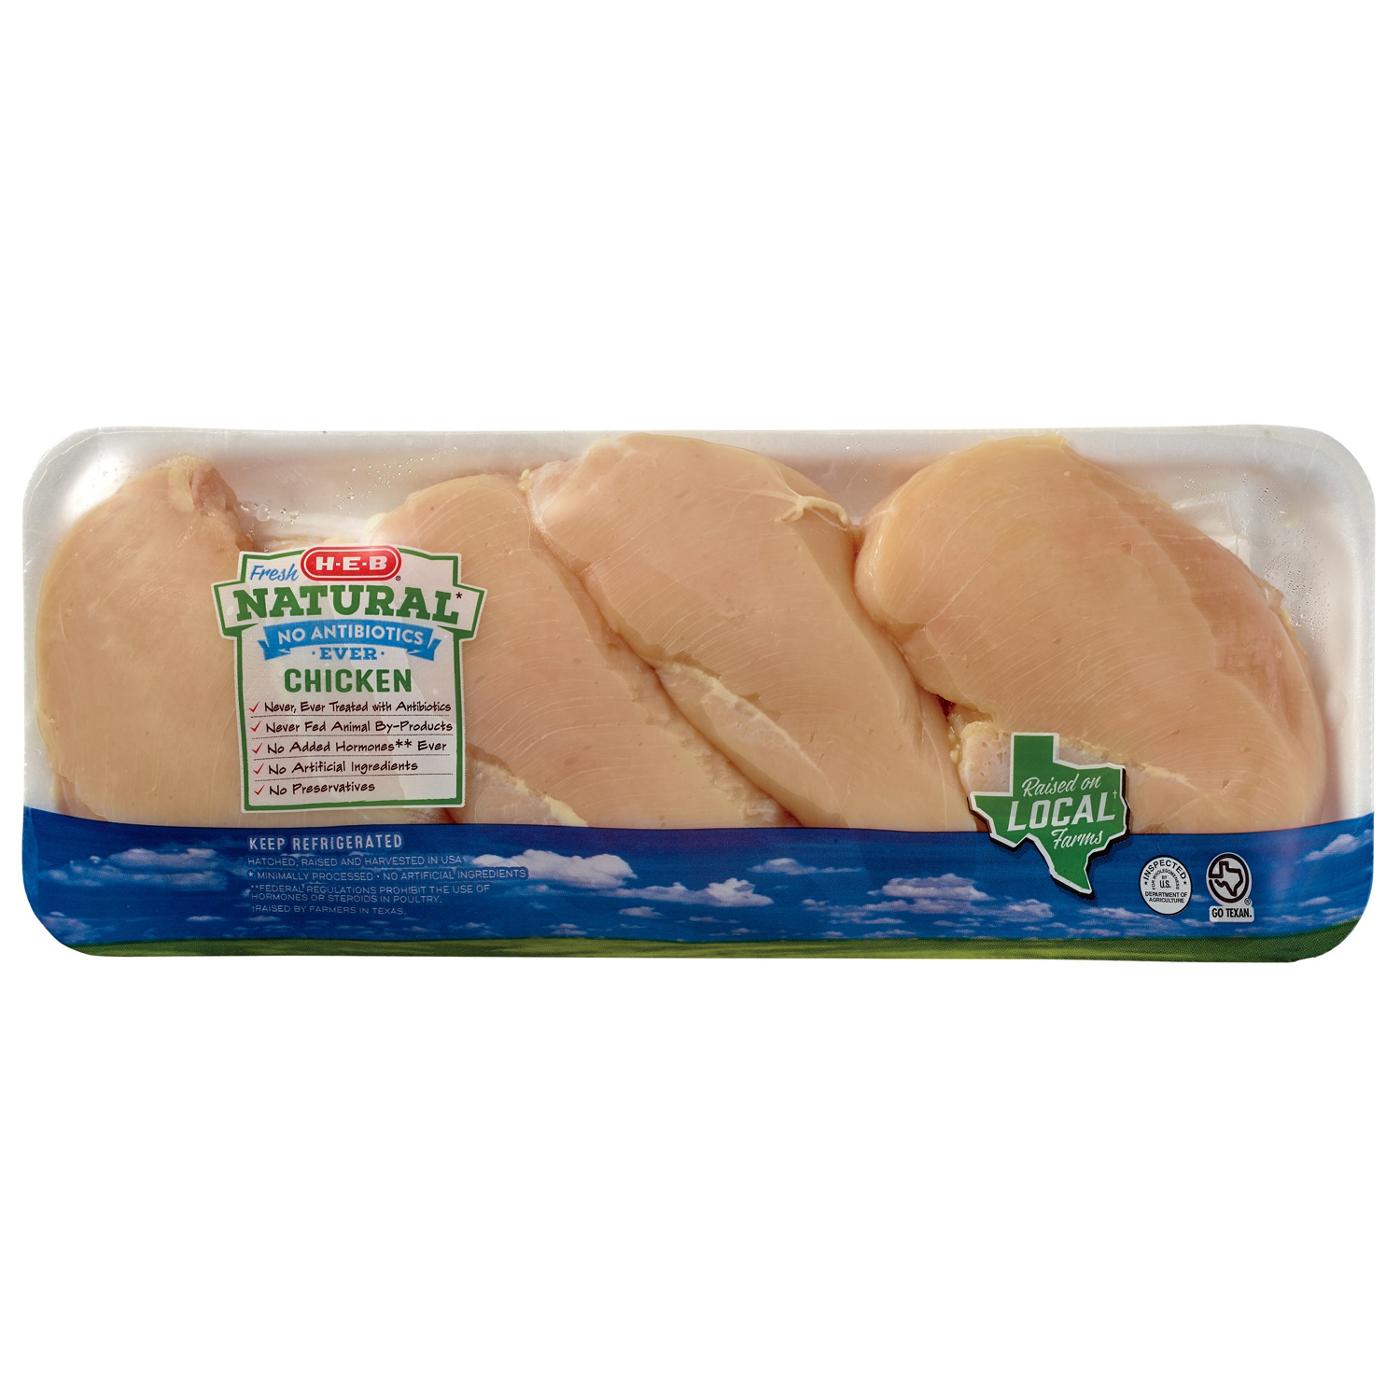 H-E-B Natural Boneless Chicken Breasts; image 1 of 4